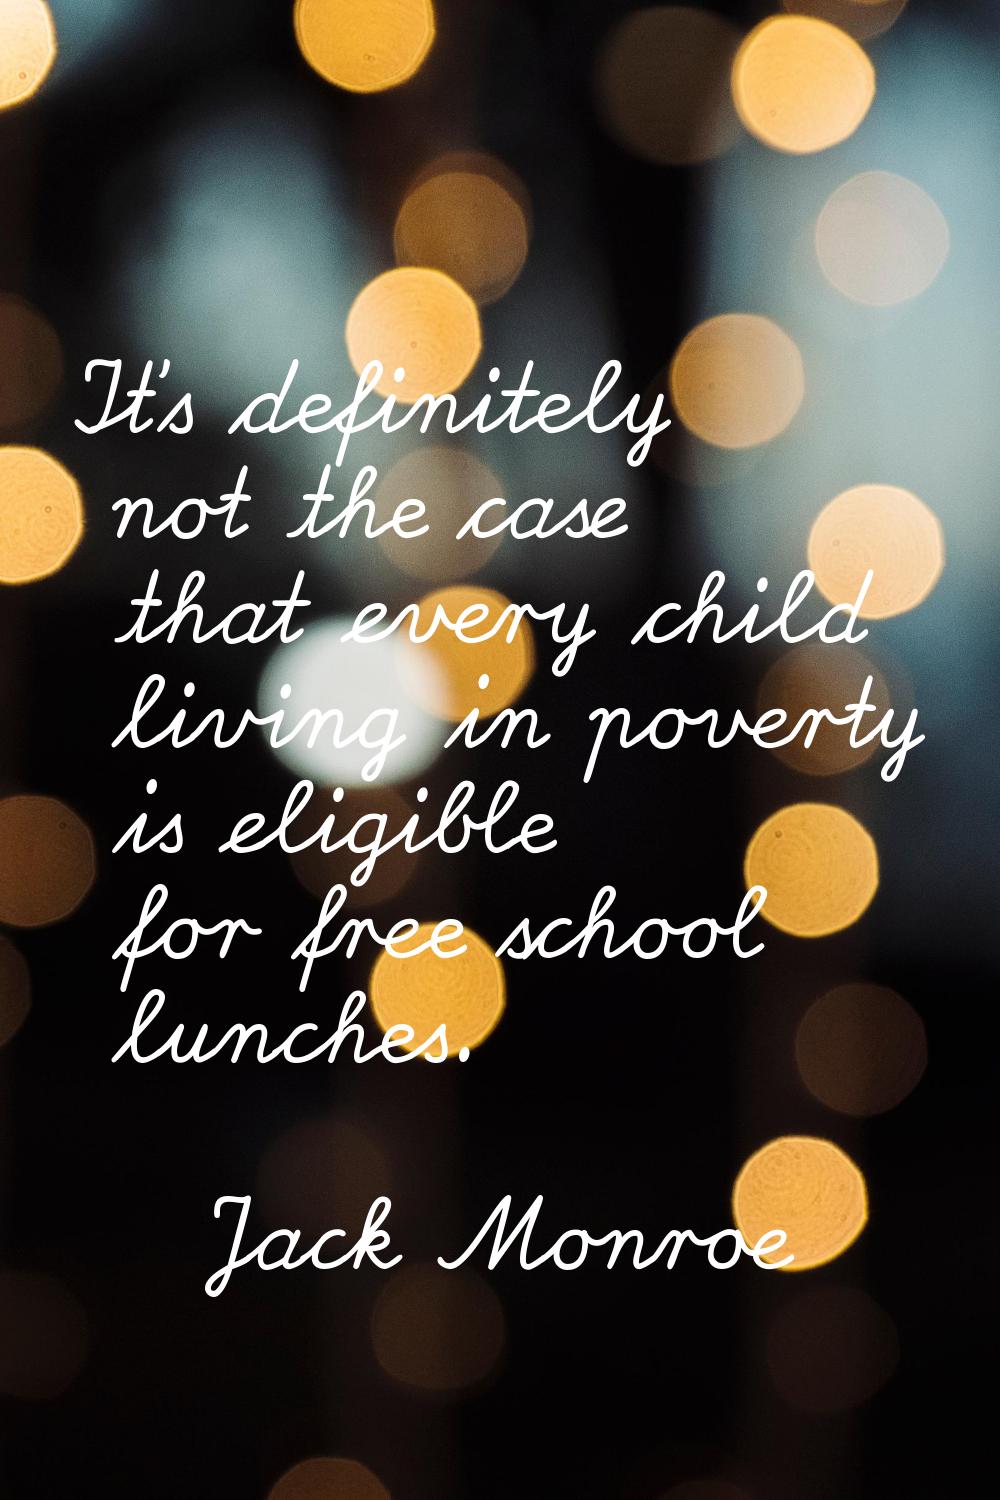 It's definitely not the case that every child living in poverty is eligible for free school lunches